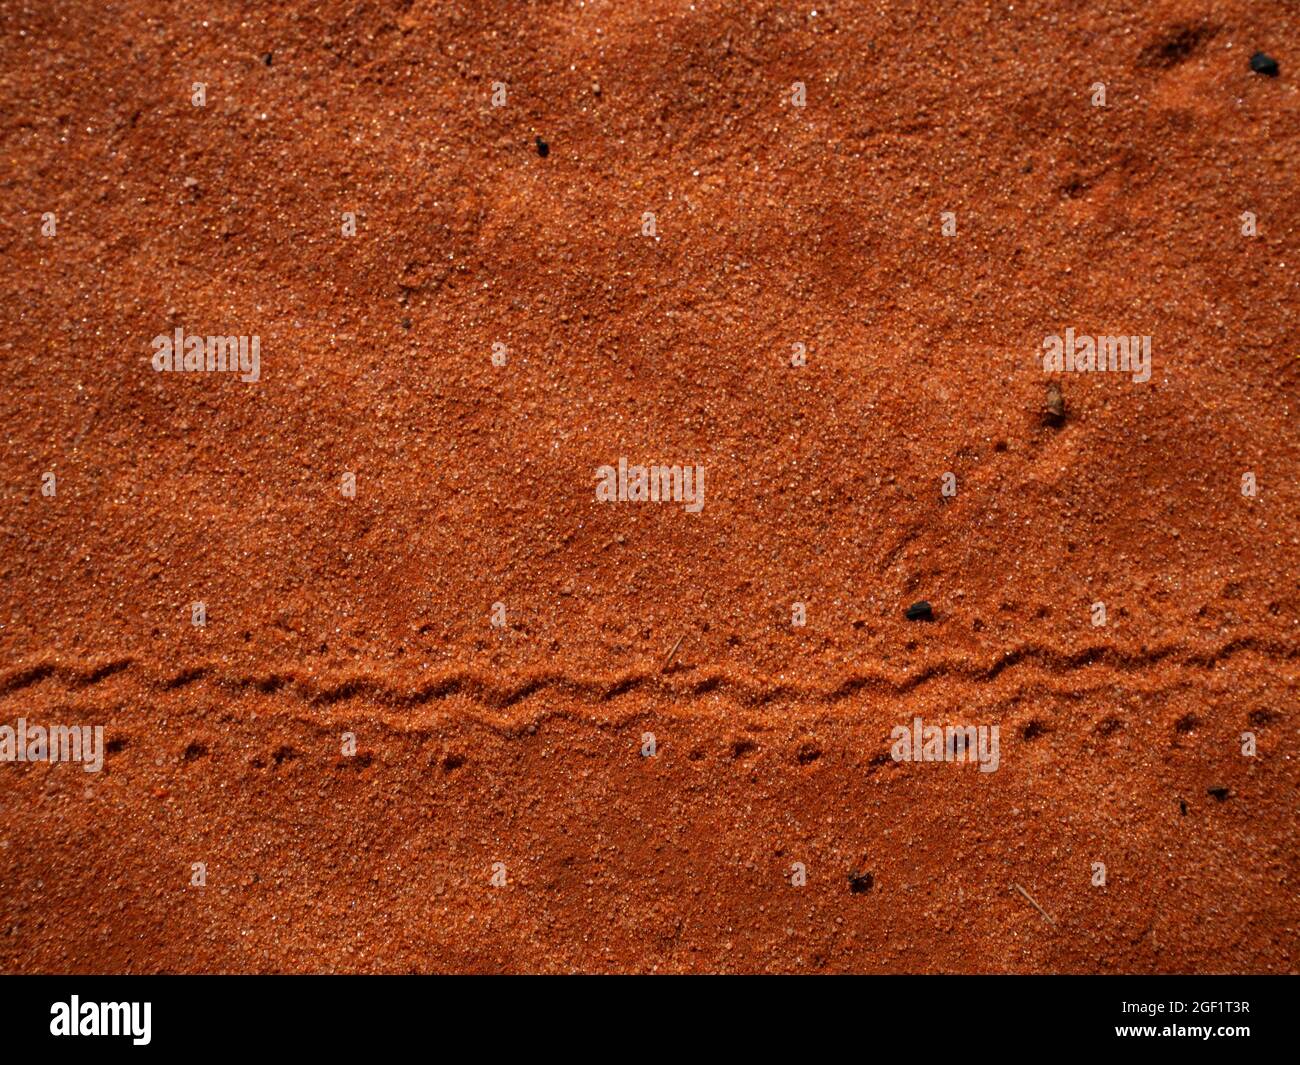 Small animal tracks on red sand in outback Central Australia background Stock Photo